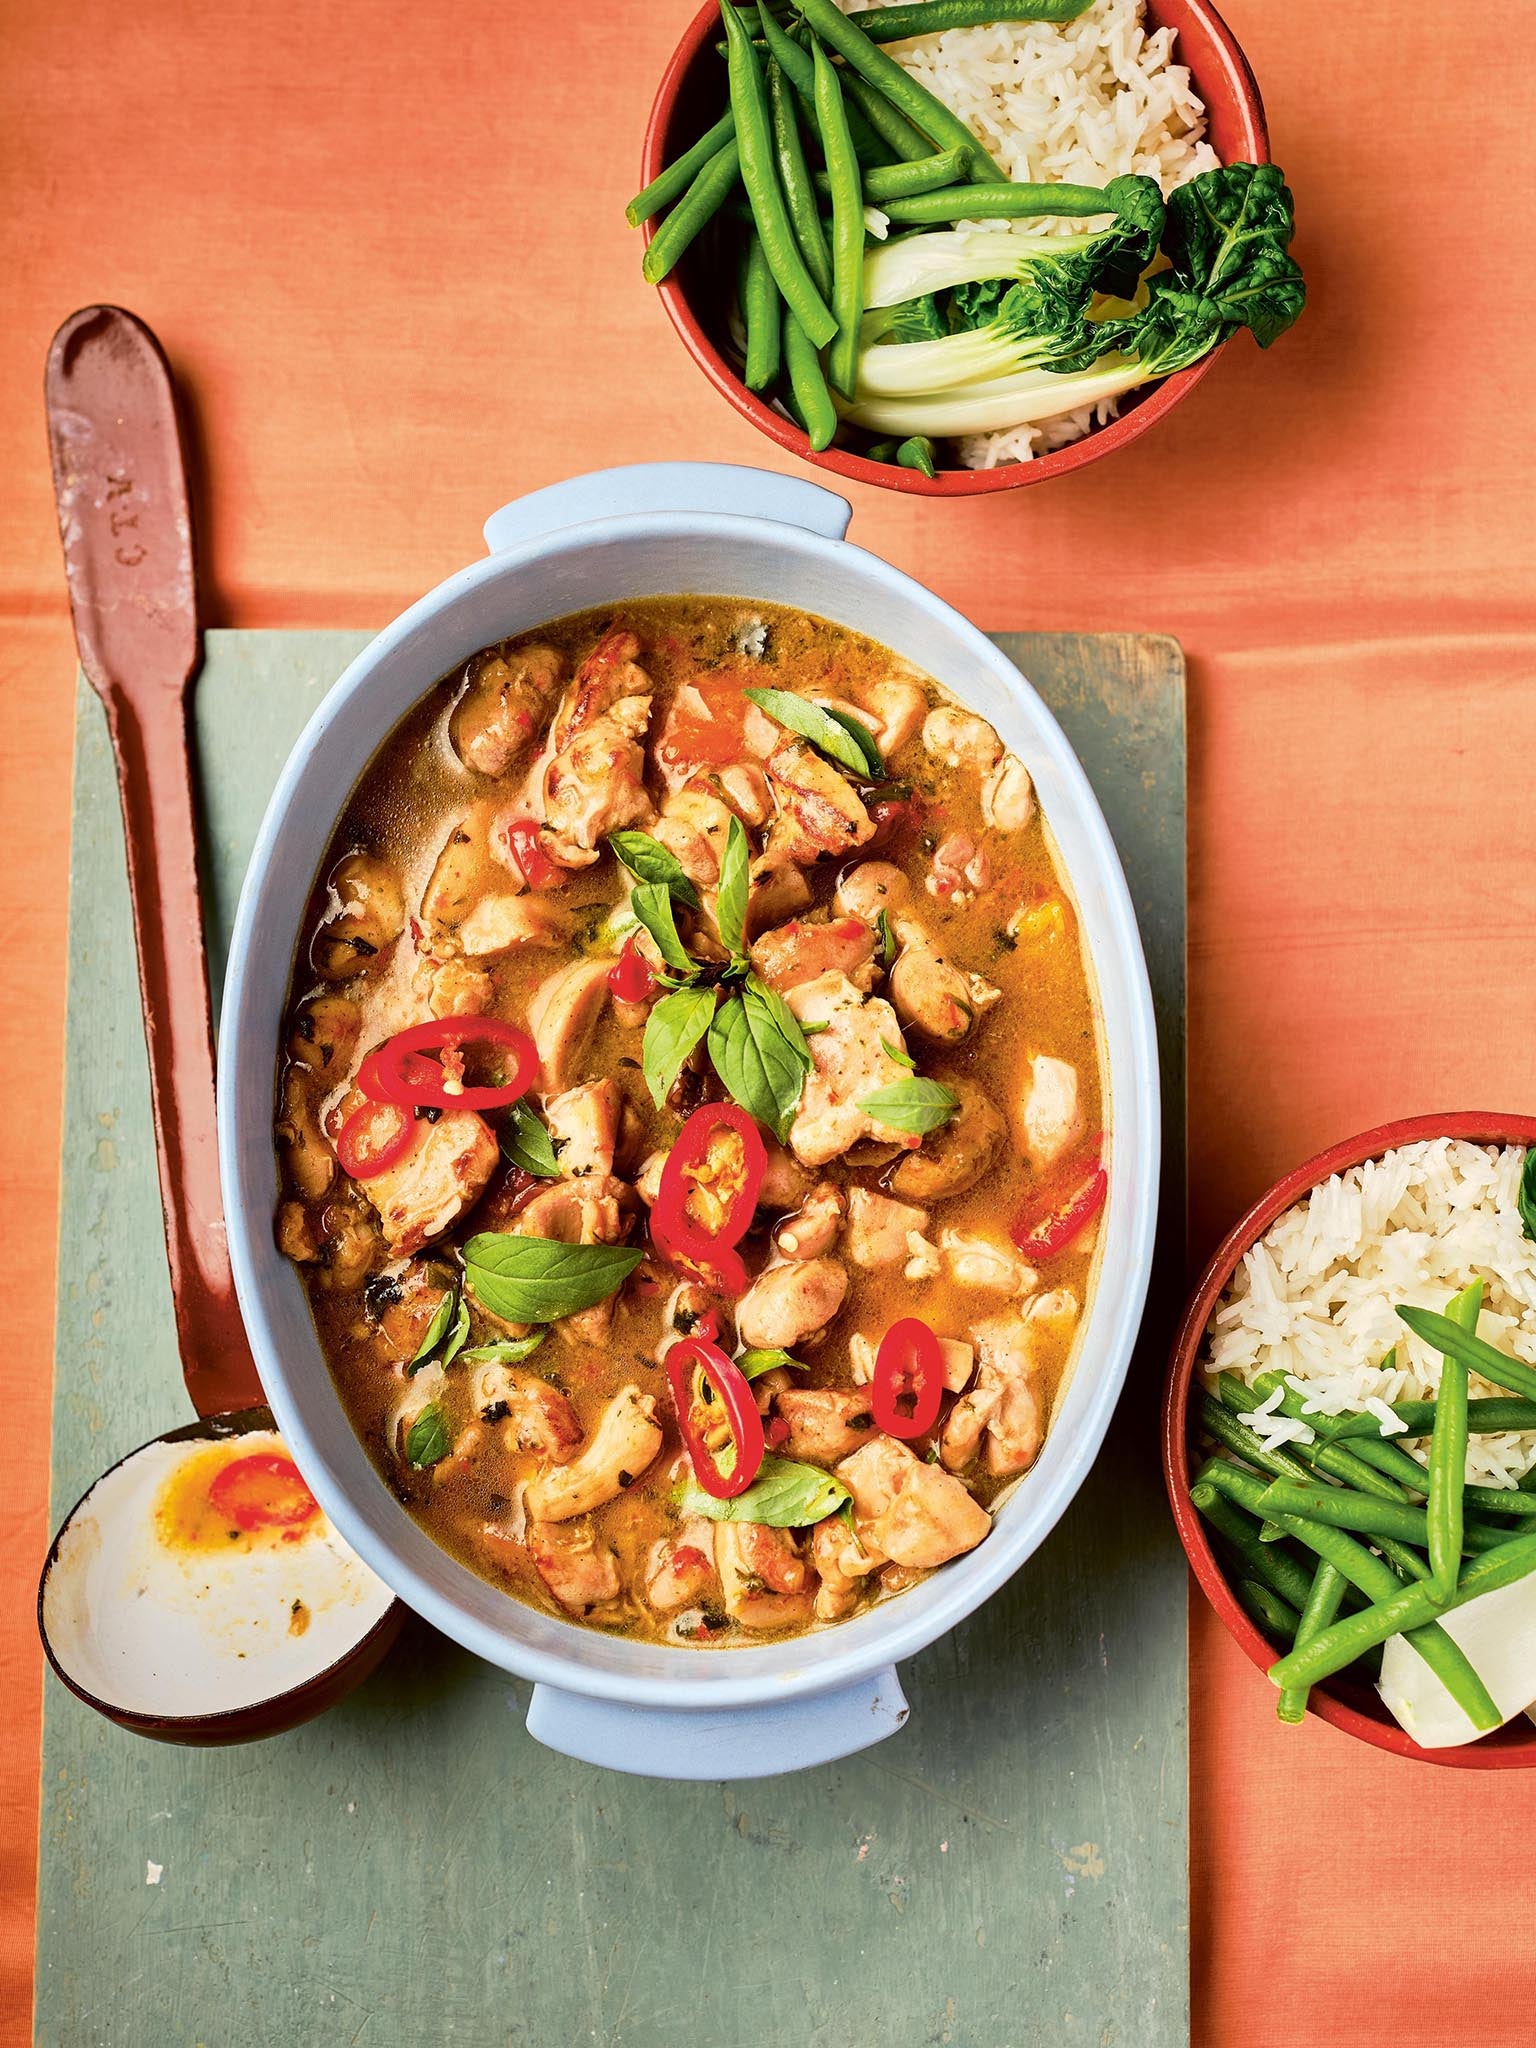 Fresh herbs and red chillies star in this flavourful Asian-inspired dish